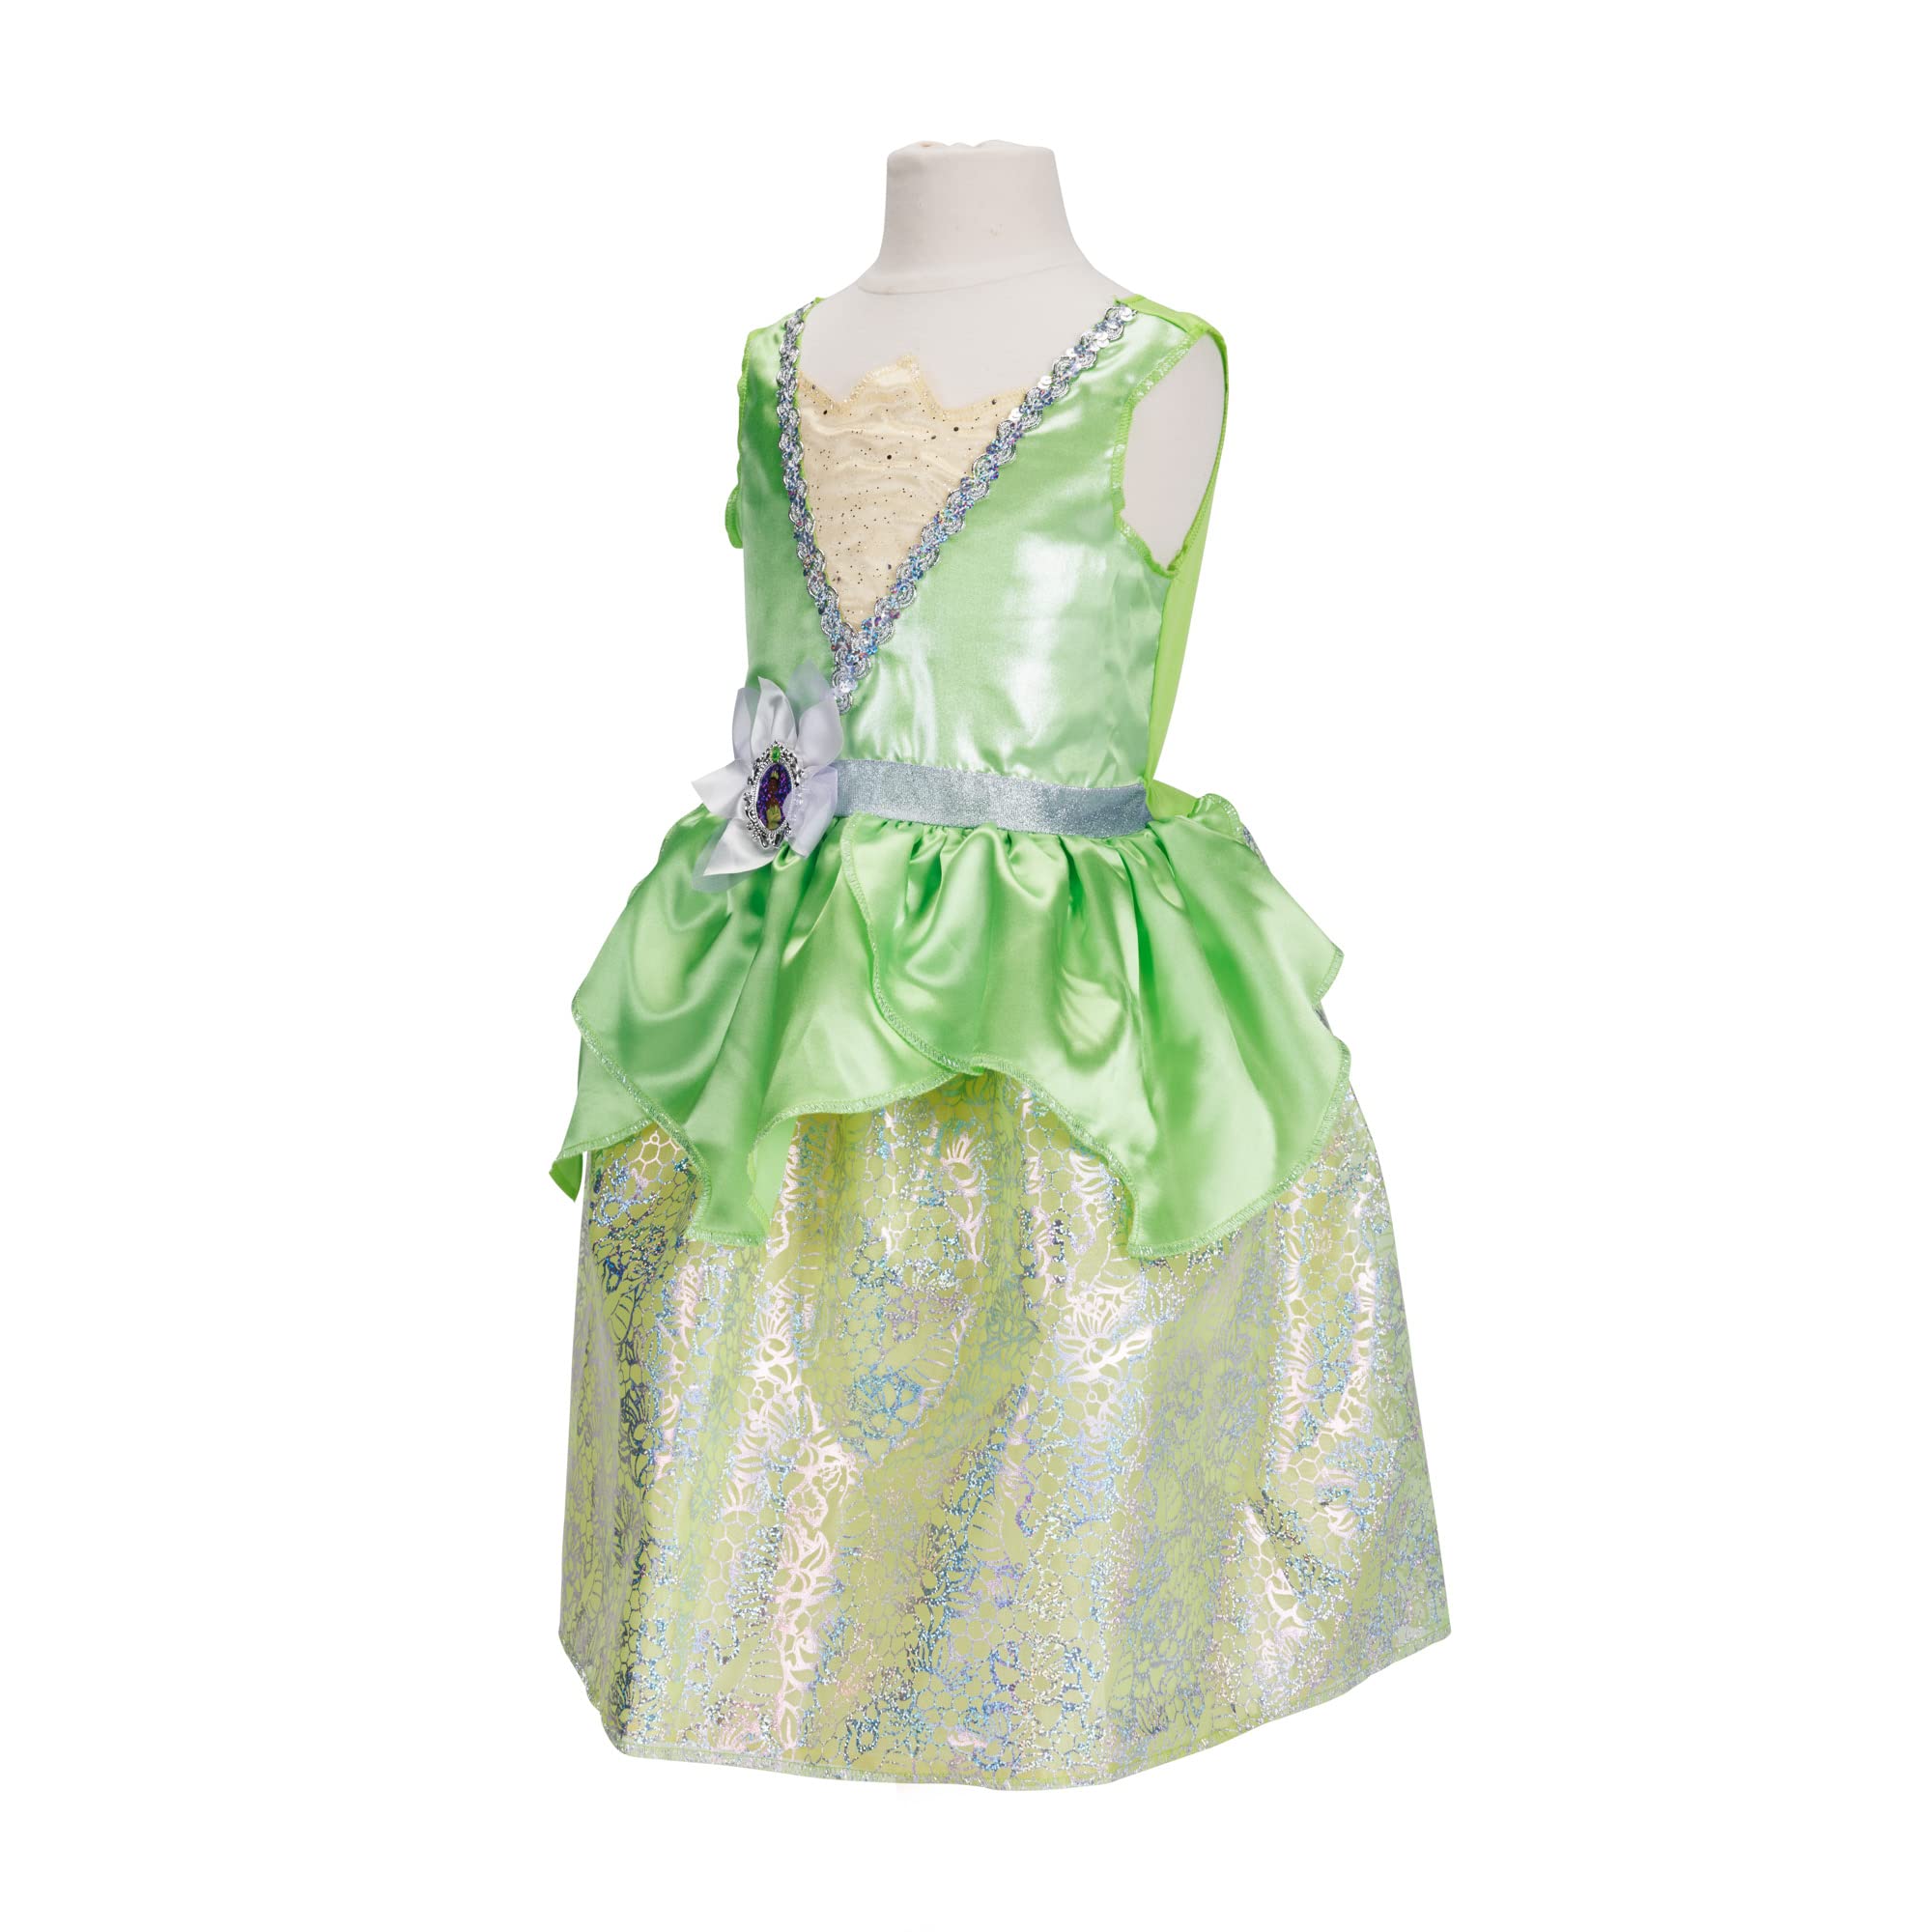 Disney Princess Disney 100 Tiana Dress Costume for Girls, Perfect for Party, Halloween Or Pretend Play Dress Up Child Size 4-6X